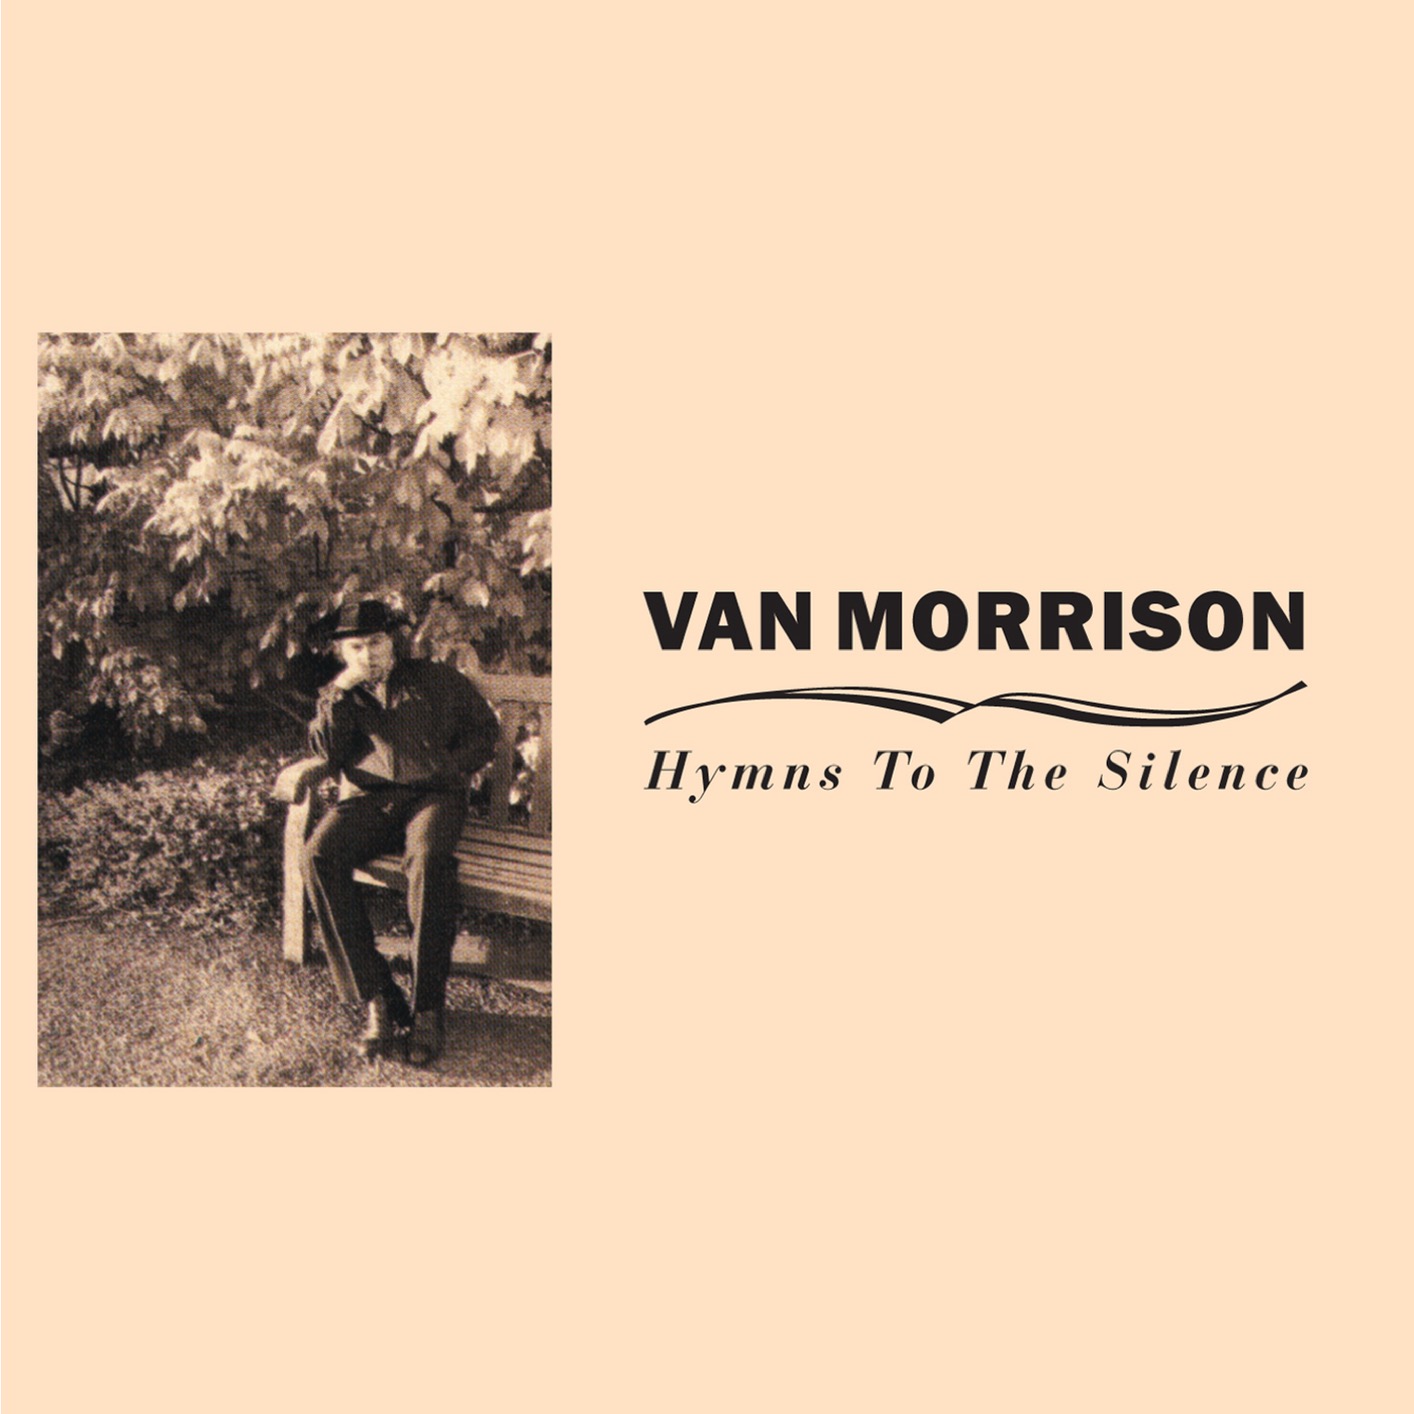 Van Morrison – Hymns to the Silence (Remastered) (1991/2020) [FLAC 24bit/96kHz]